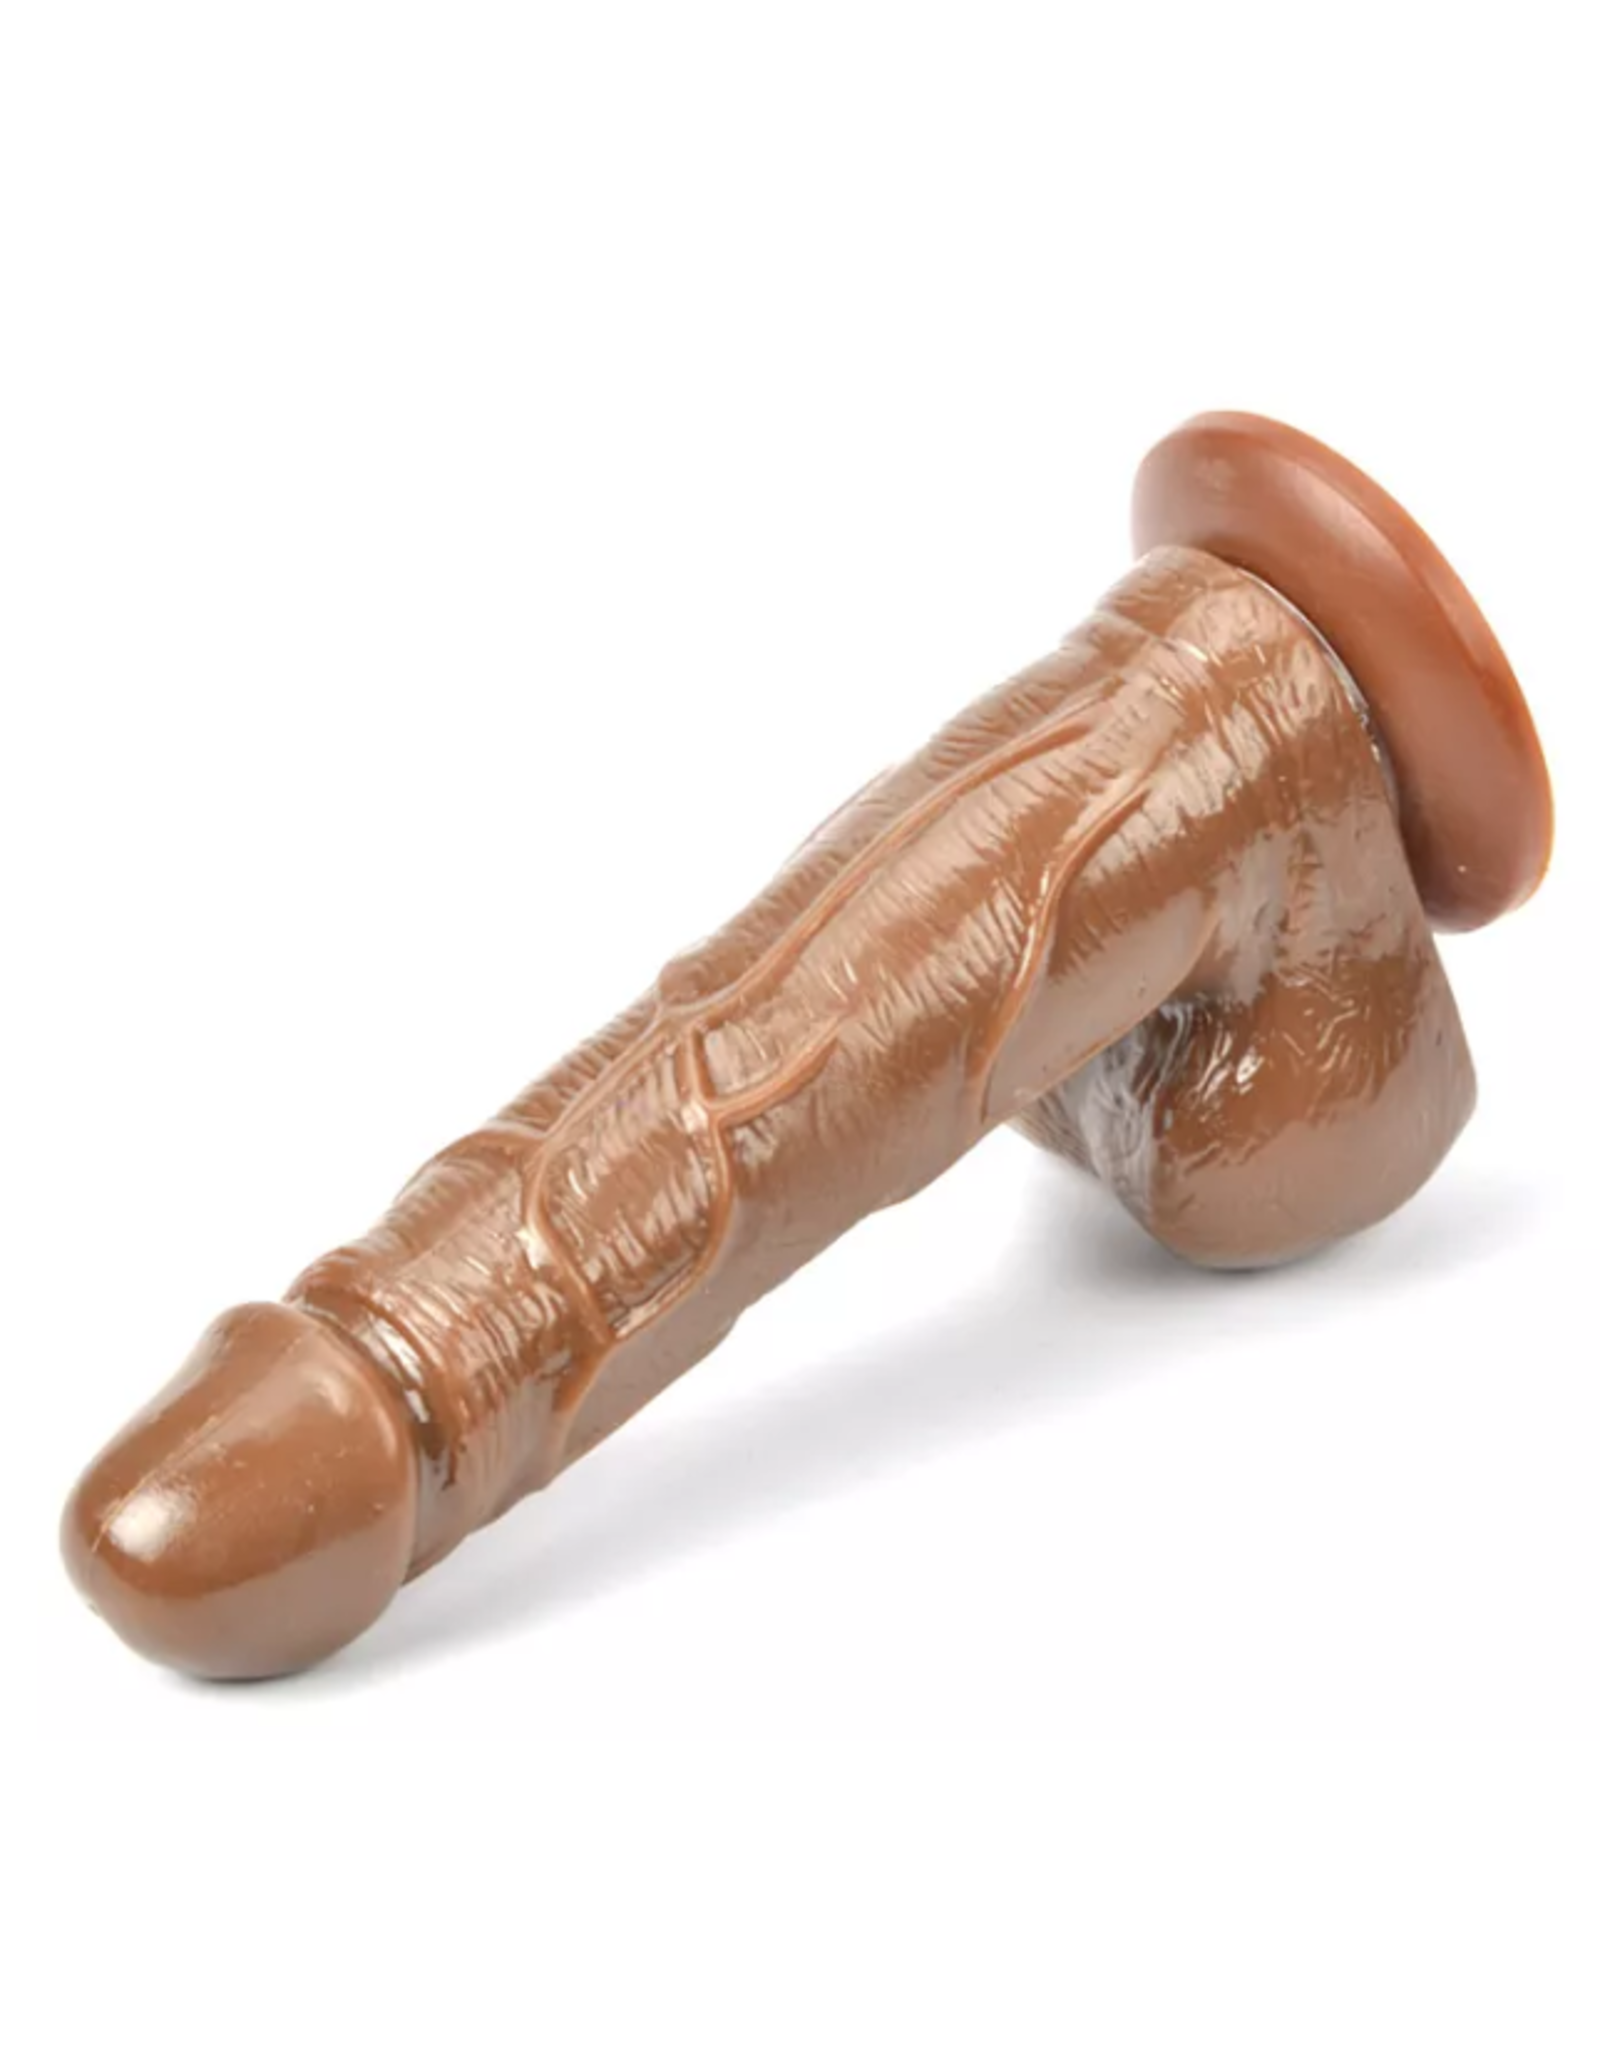 Peachy Novelties Realistic Suction Cup Dong